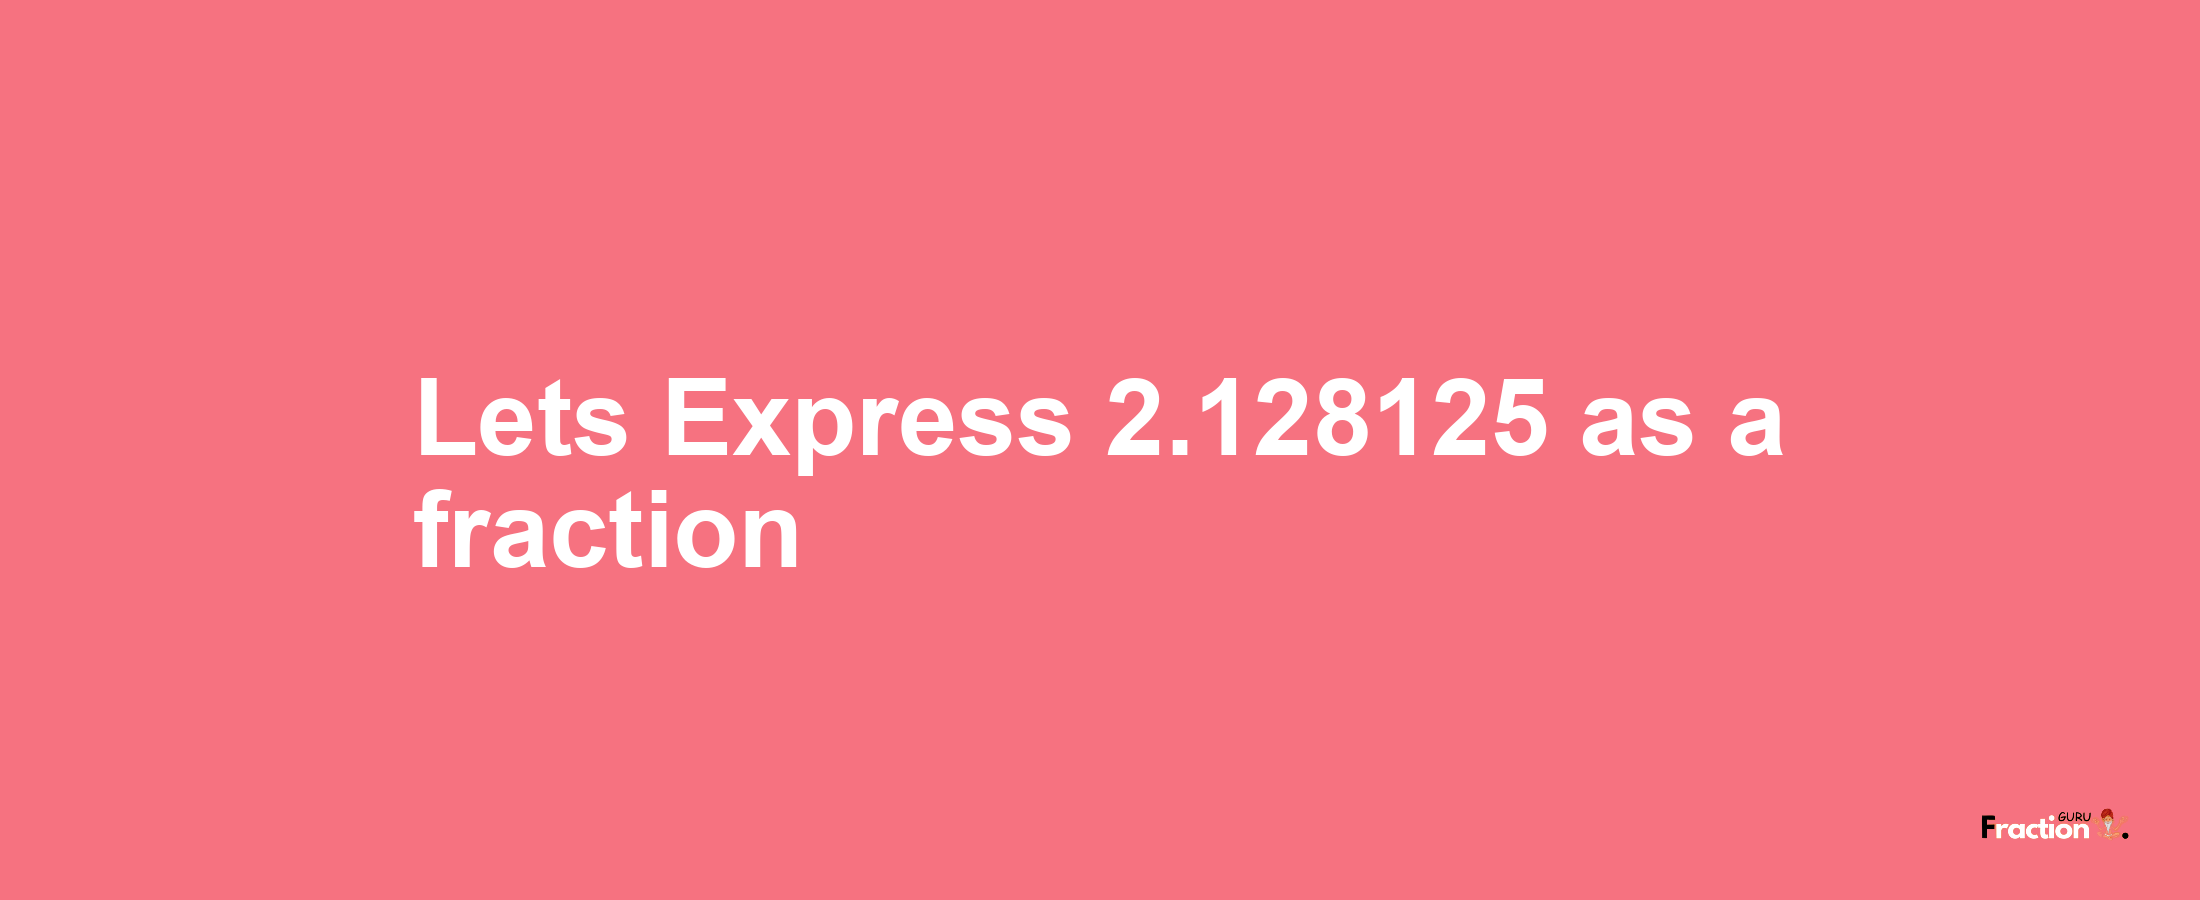 Lets Express 2.128125 as afraction